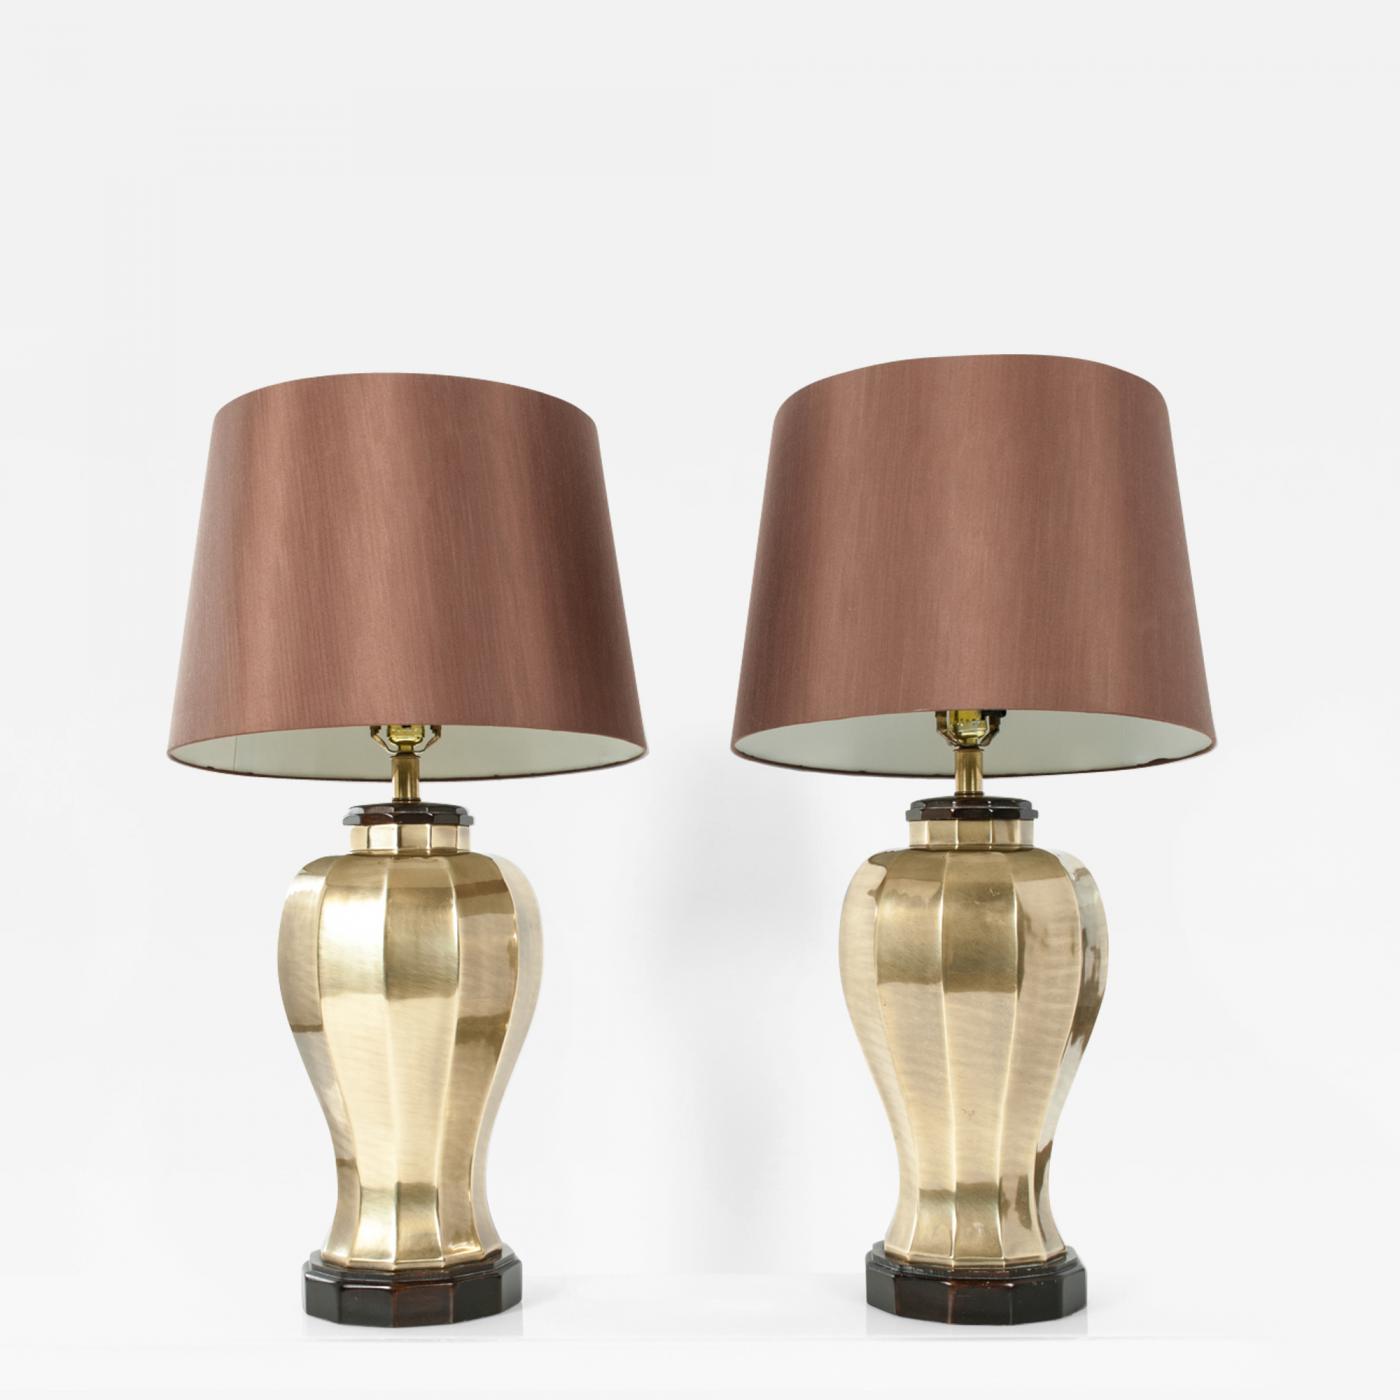 Brass Ginger Jar Lamps With Wood Base, Brass Ginger Jar Table Lamps